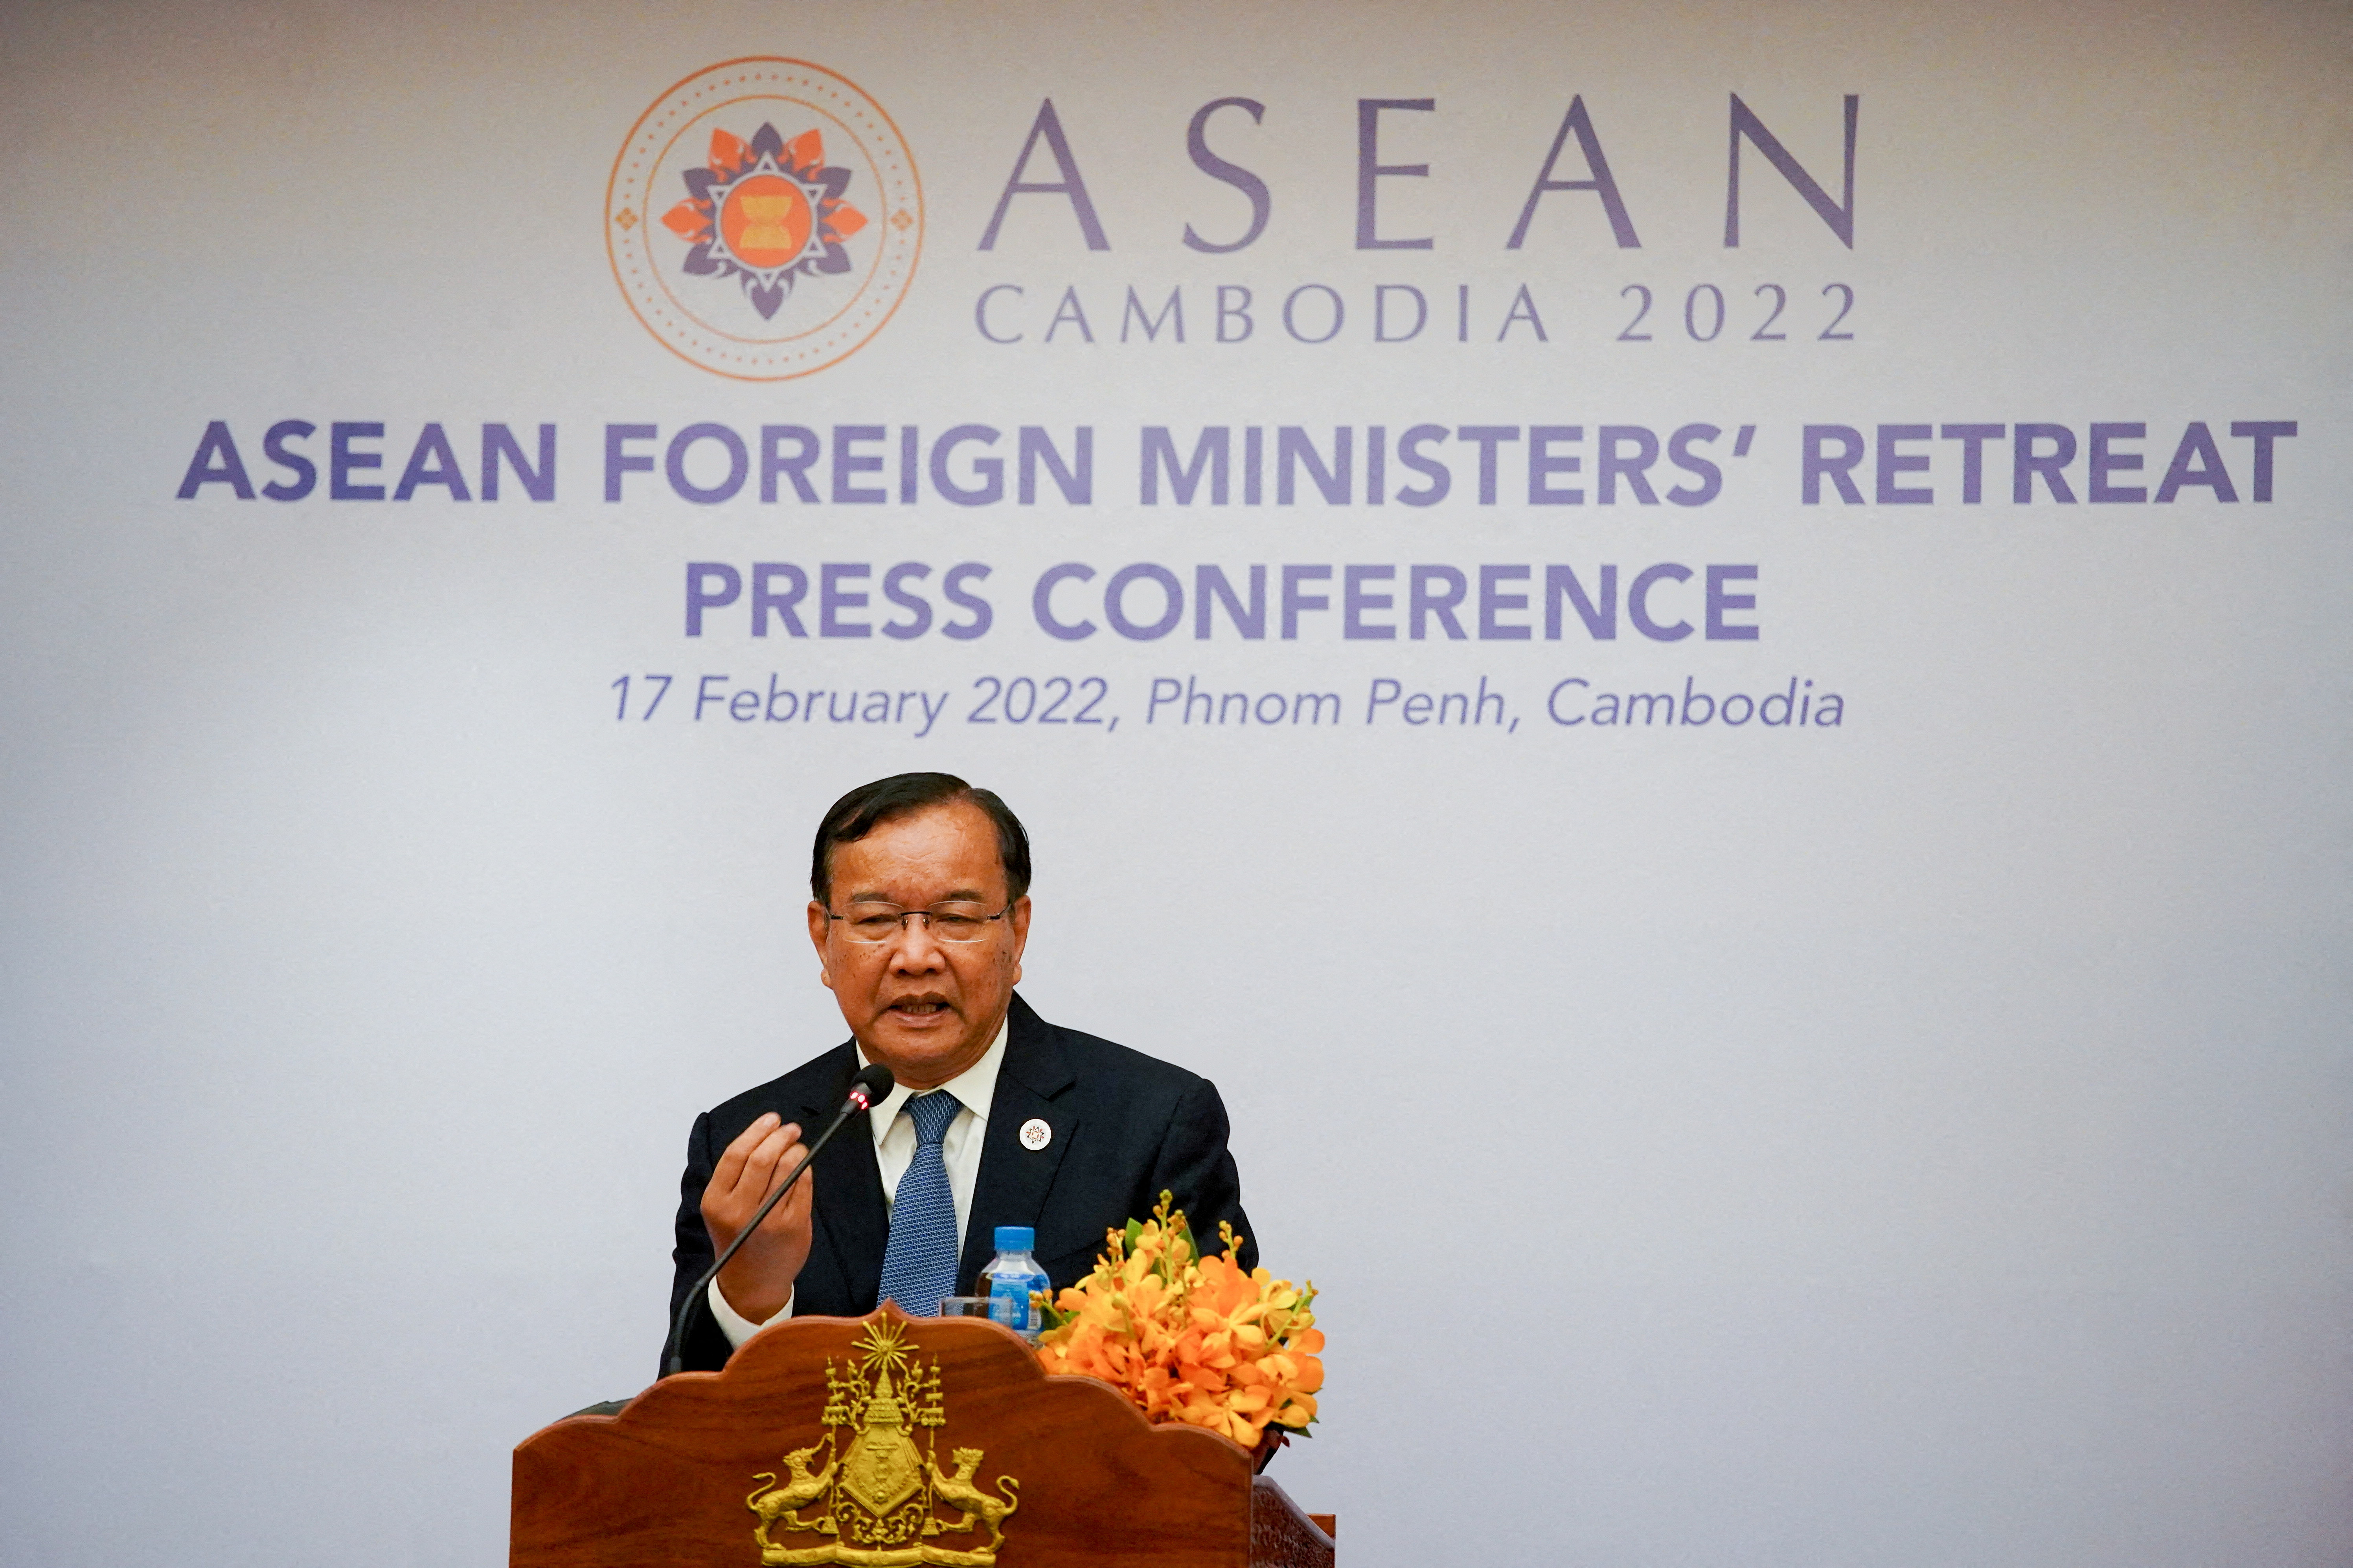 ASEAN foreign ministers meet in Phnom Penh